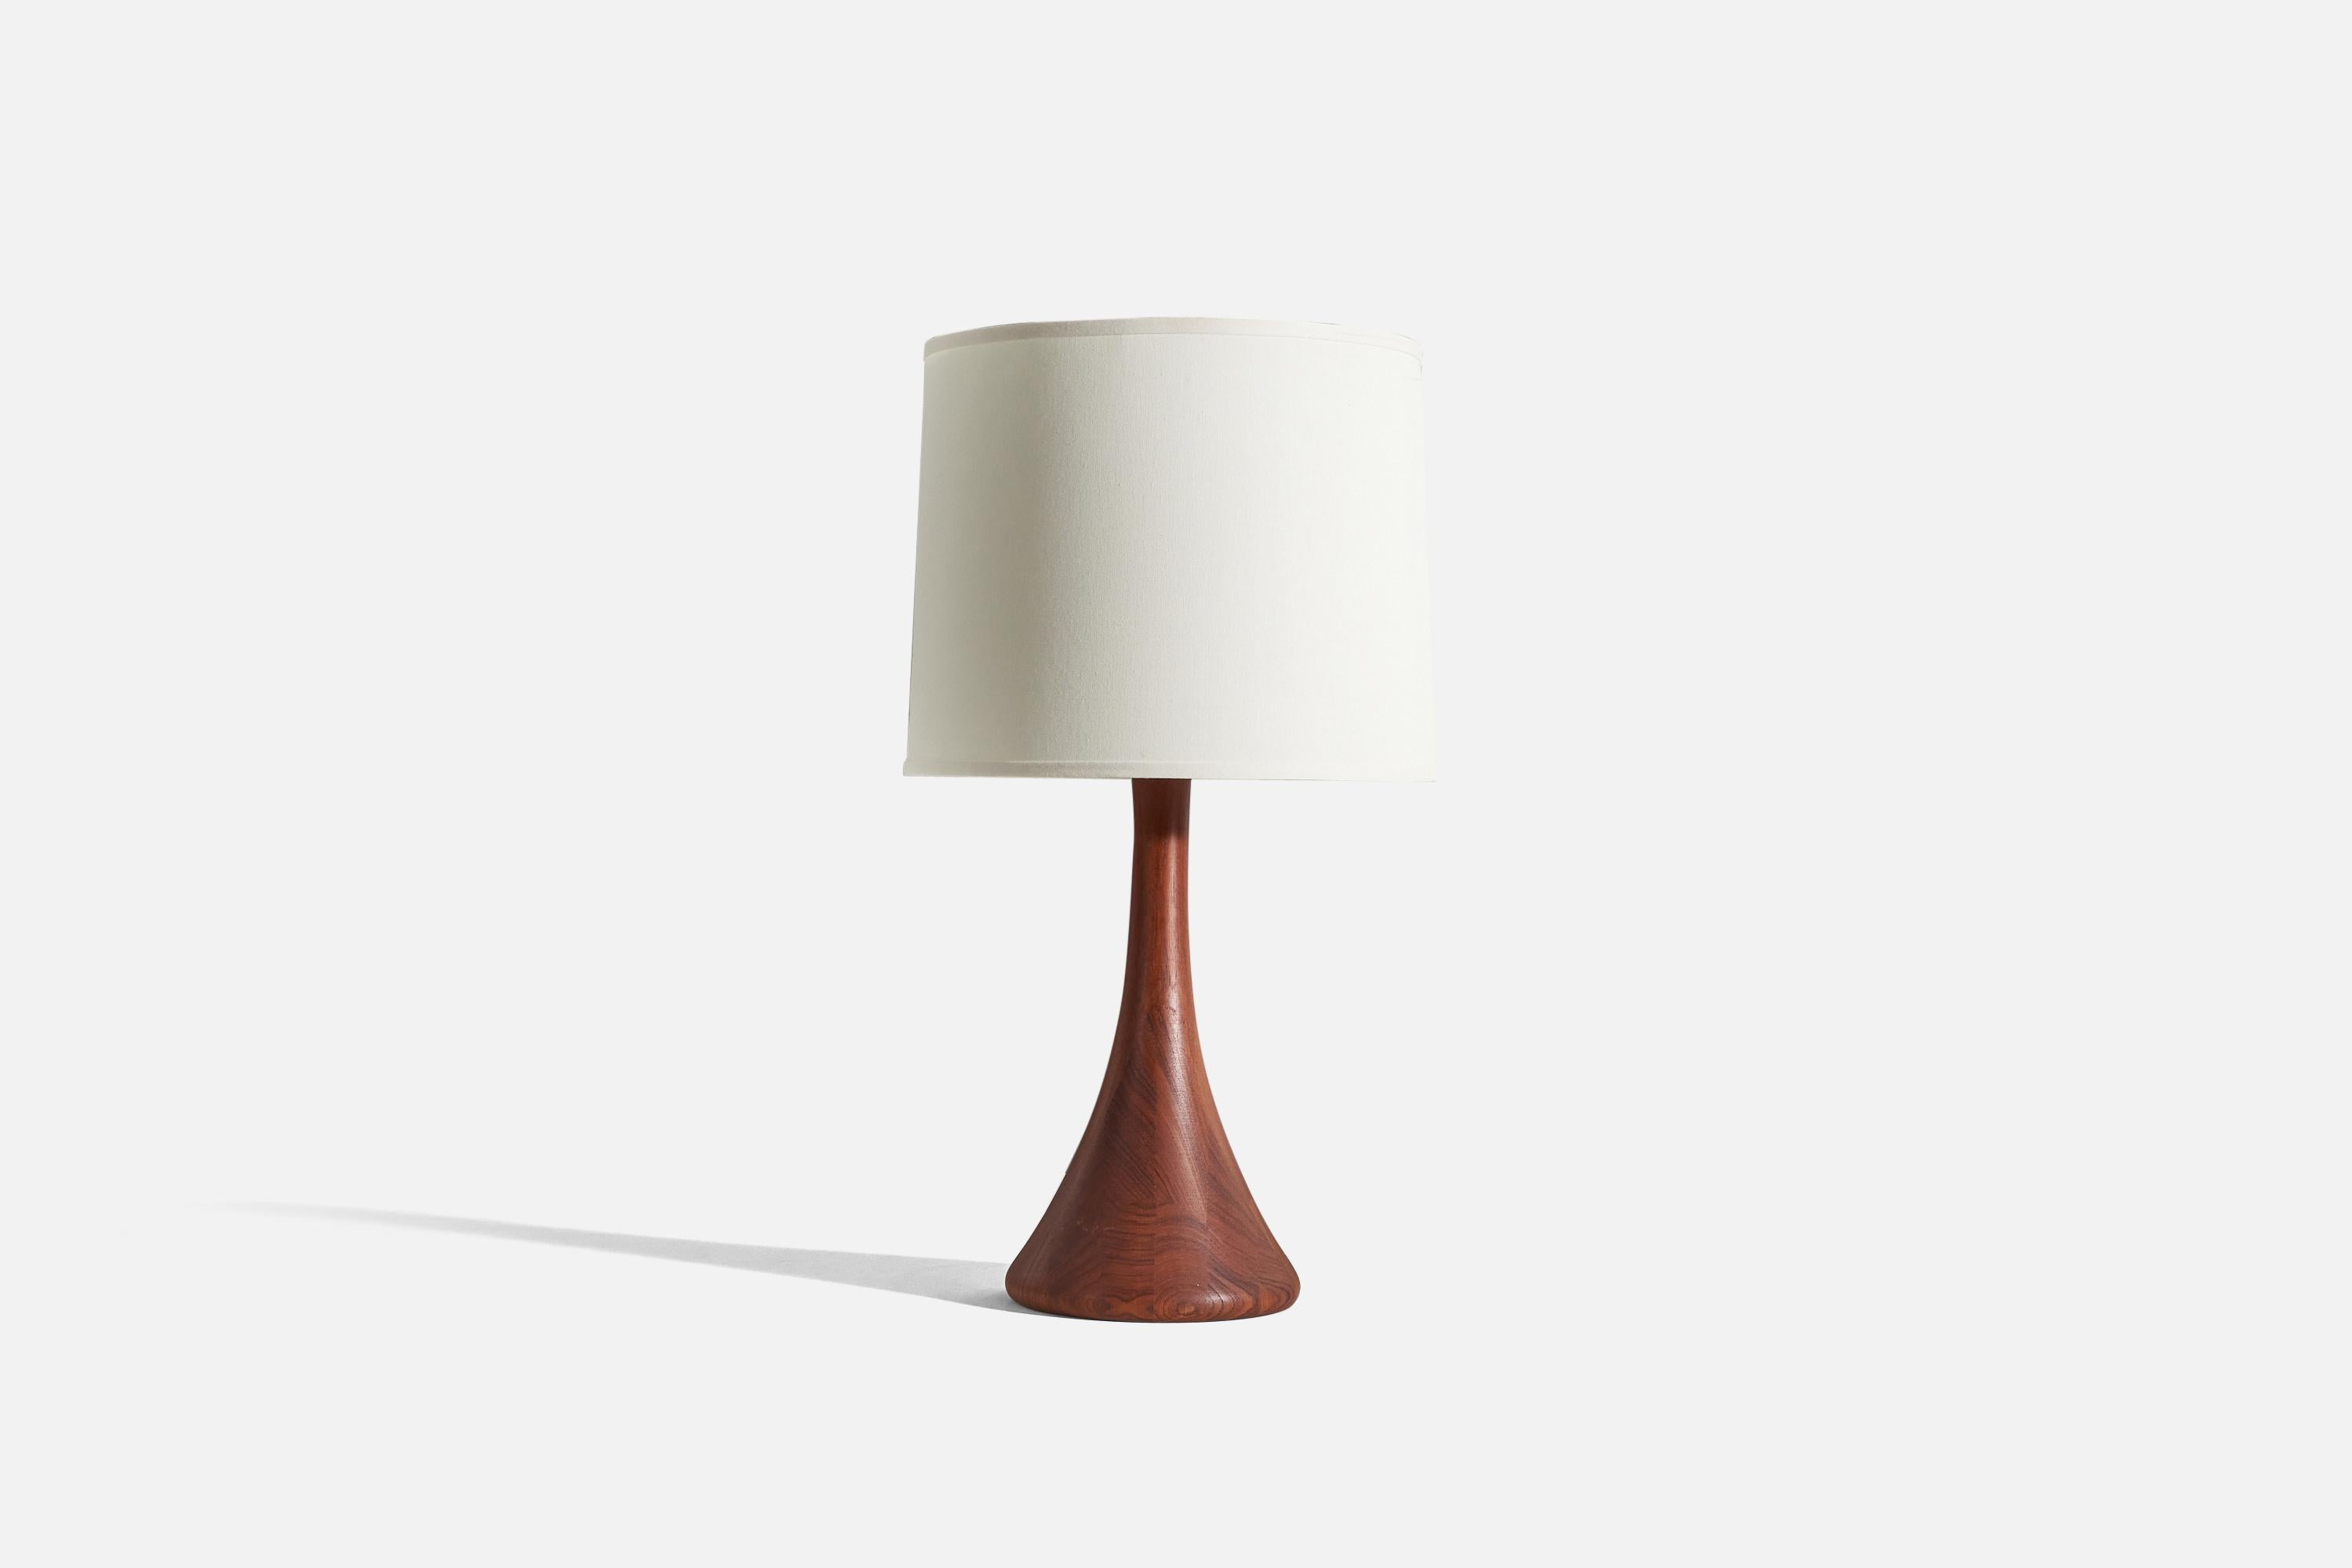 A solid teak table lamp designed and produced in Denmark, 1950s.

Sold without lampshade. 
Dimensions of lamp (inches) : 25.12 x 9.12 x 9.12 (H x W x D)
Dimensions of shade (inches) : 15 x 16.25 x 13 (T x B x S)
Dimension of lamp with shade